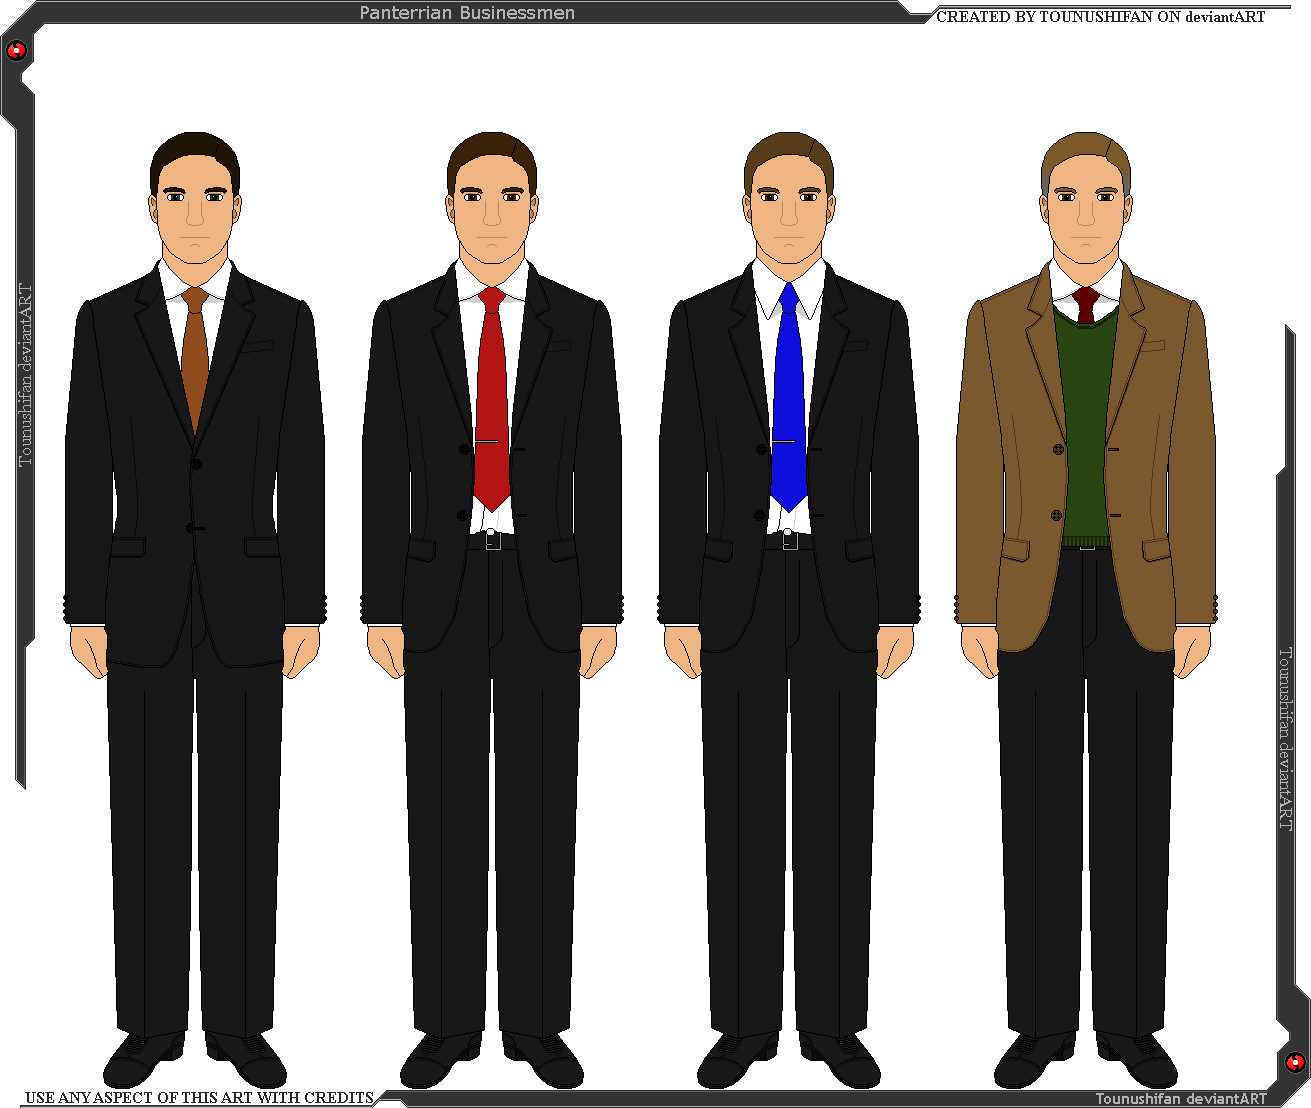 [Non-Canon] Panterria - Businessmen by Grand-Lobster-King on DeviantArt